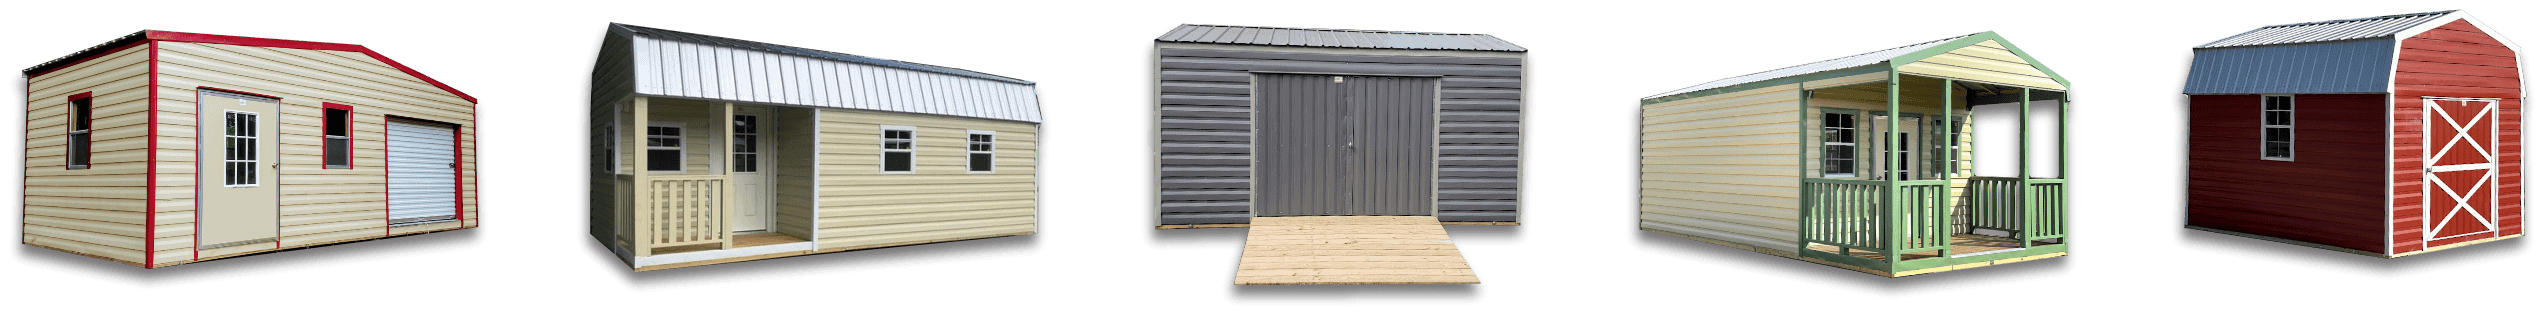 Shop our selection of 12x30 sheds for sale - including portable buildings, storage sheds, and outdoor storage options. As your trusted shed dealer, Robin Sheds offers a variety of shed styles to choose from.